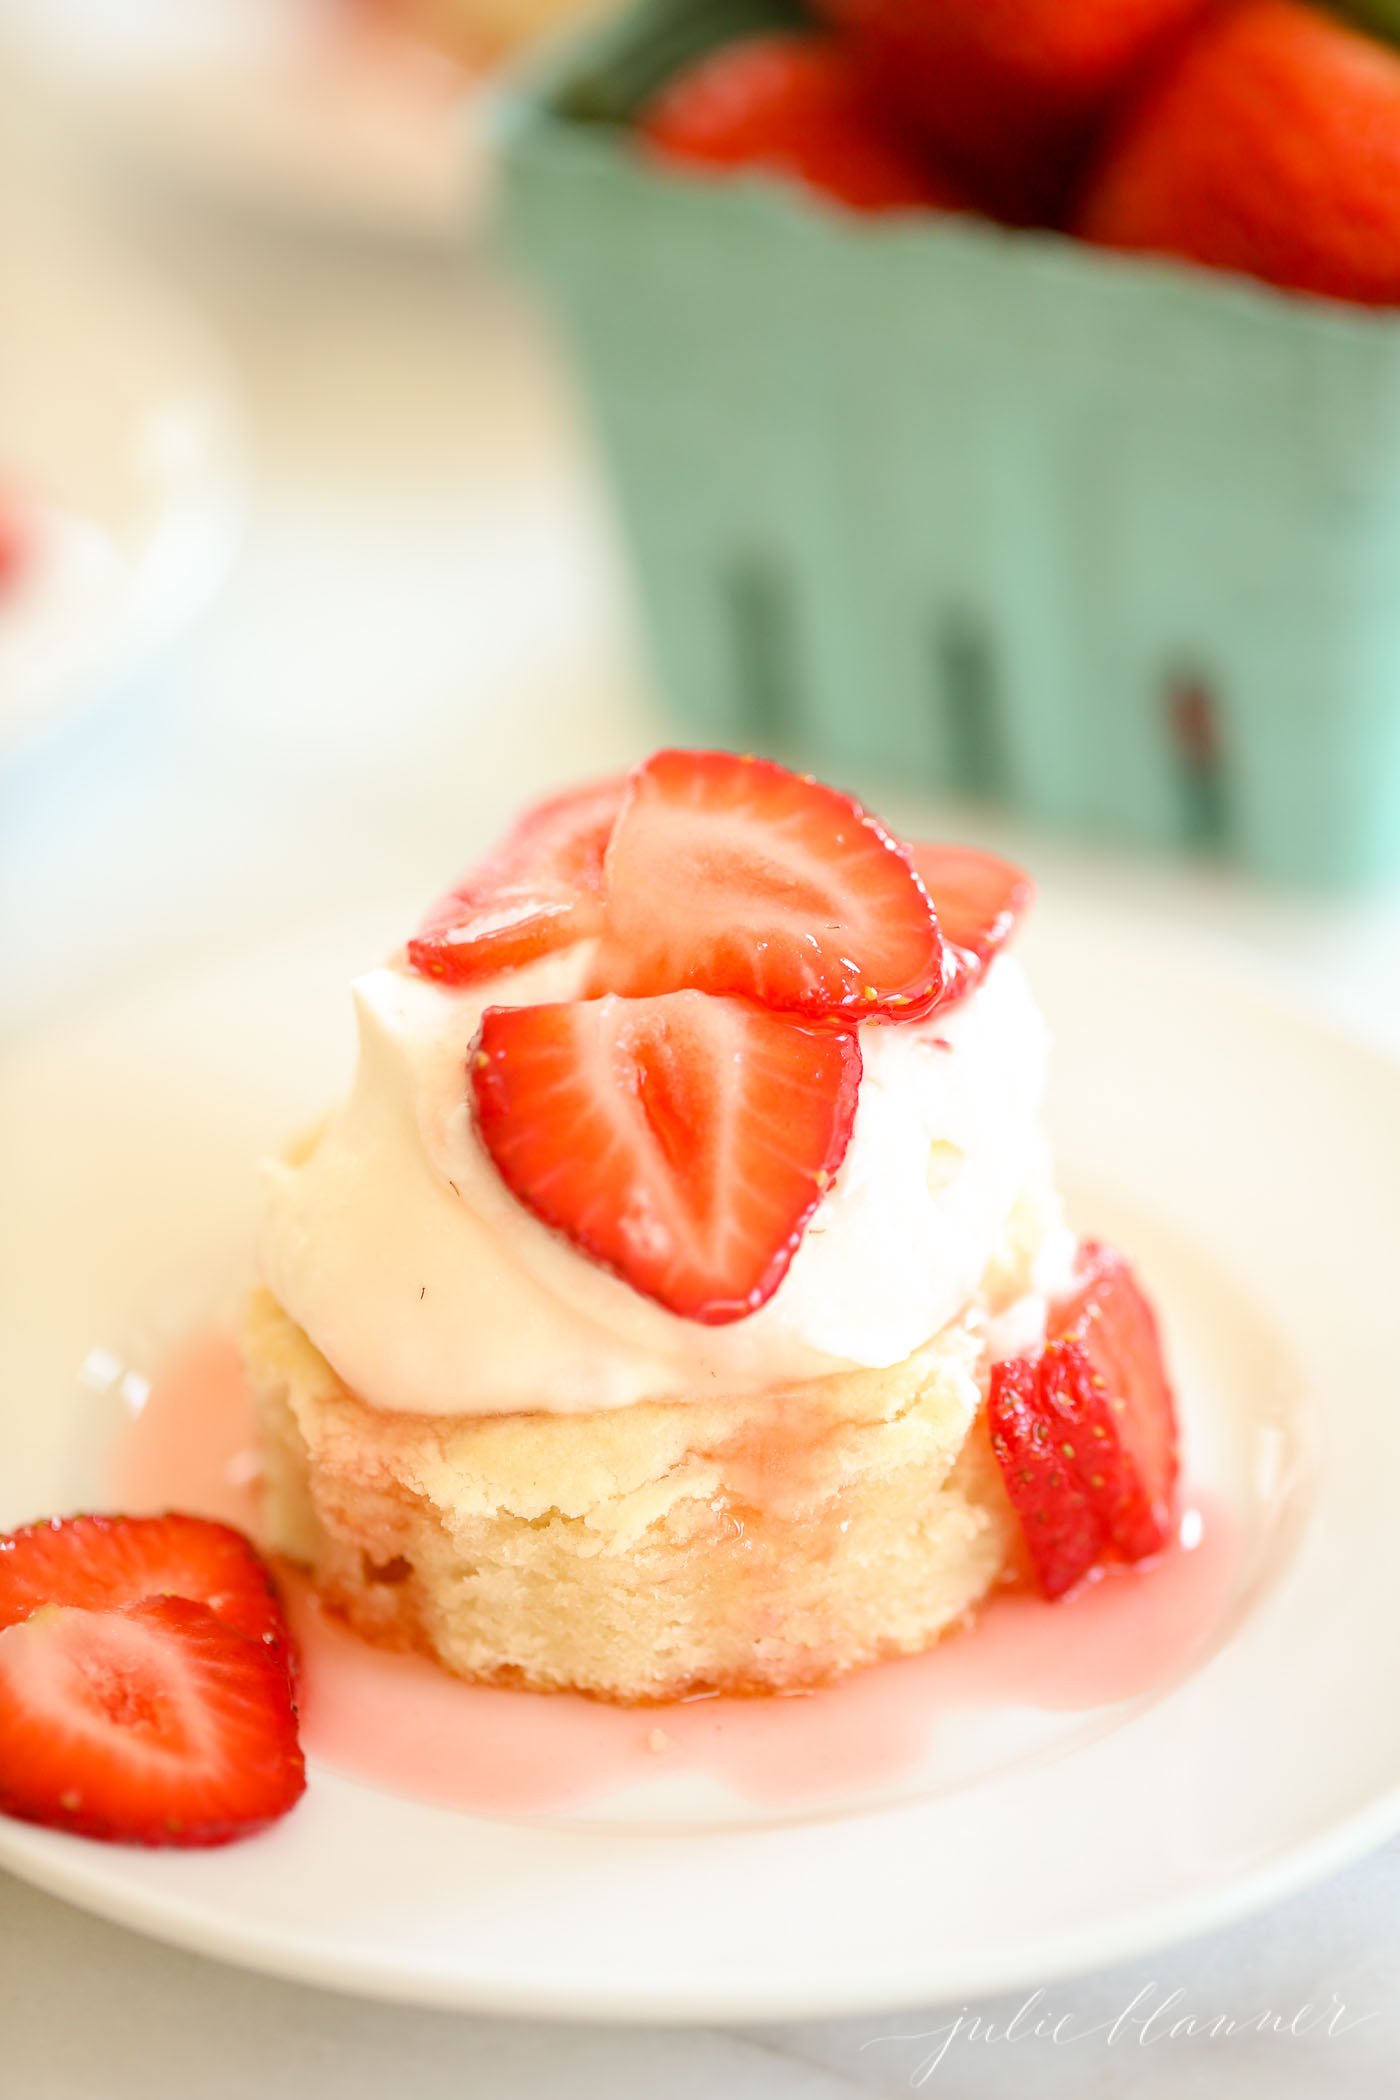 strawberry shortcake on a white plate, blue box of strawberries in background.